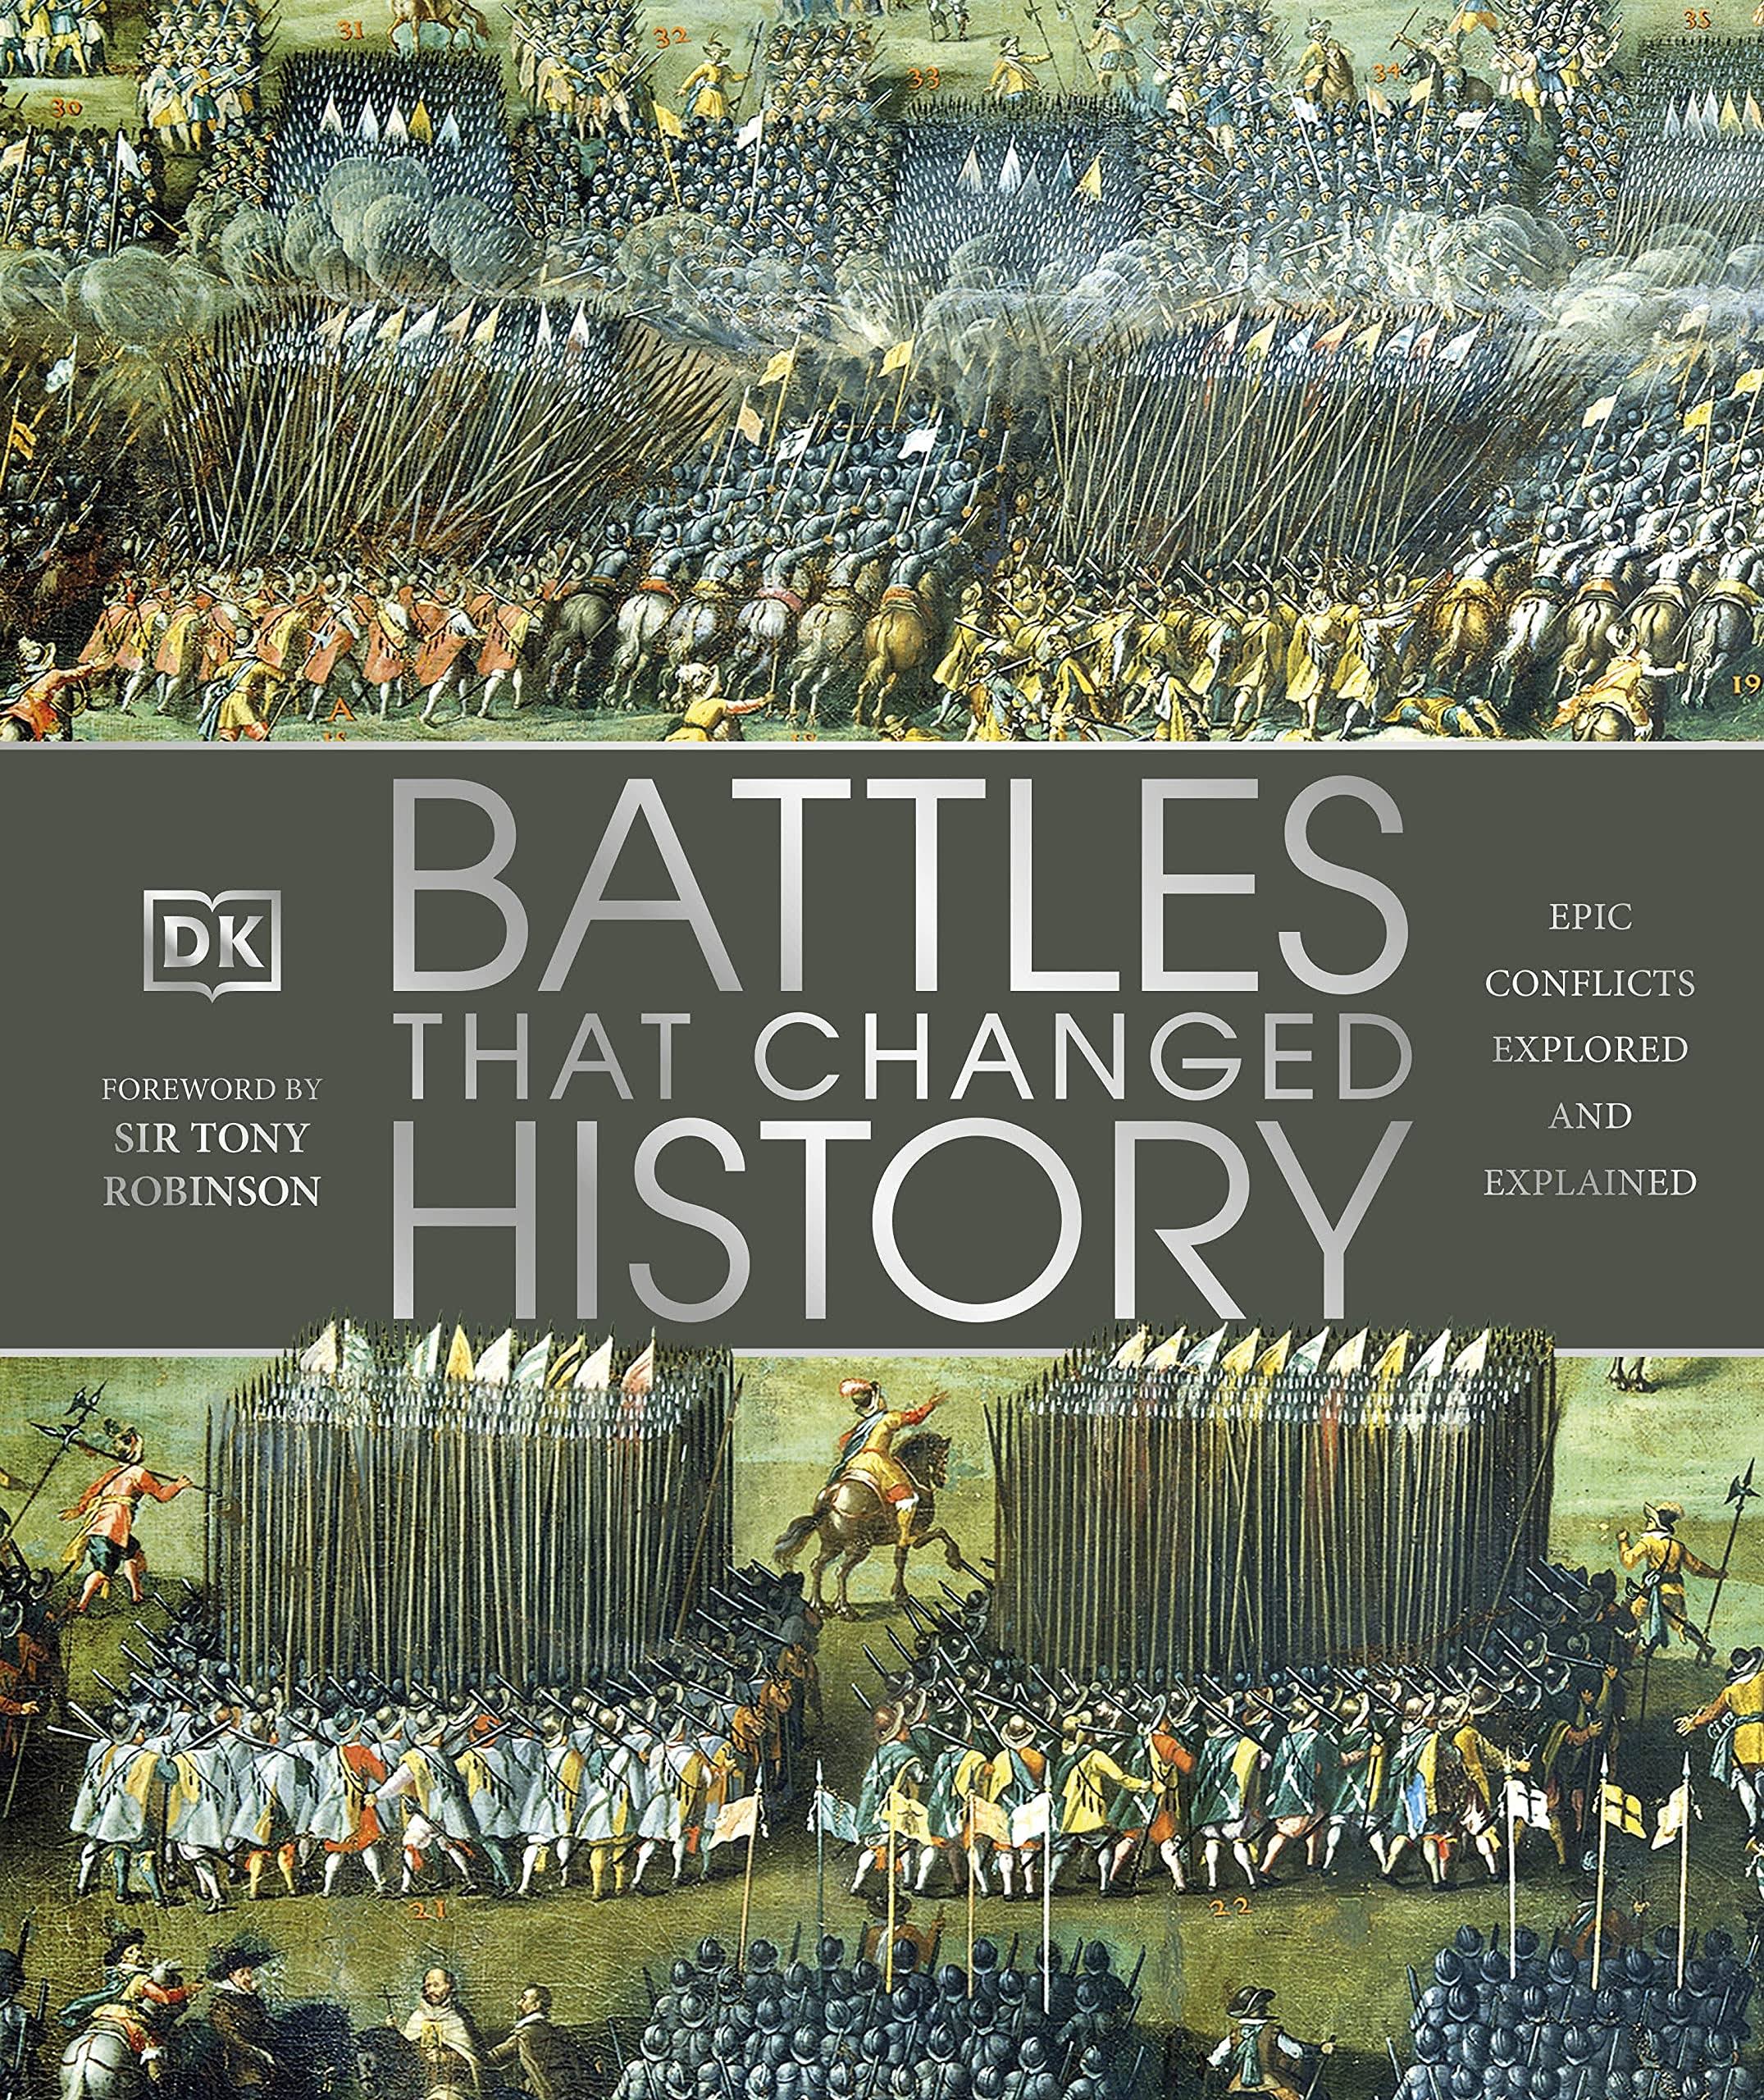 Battles that Changed History: Epic Conflicts Explored and Explained - DK